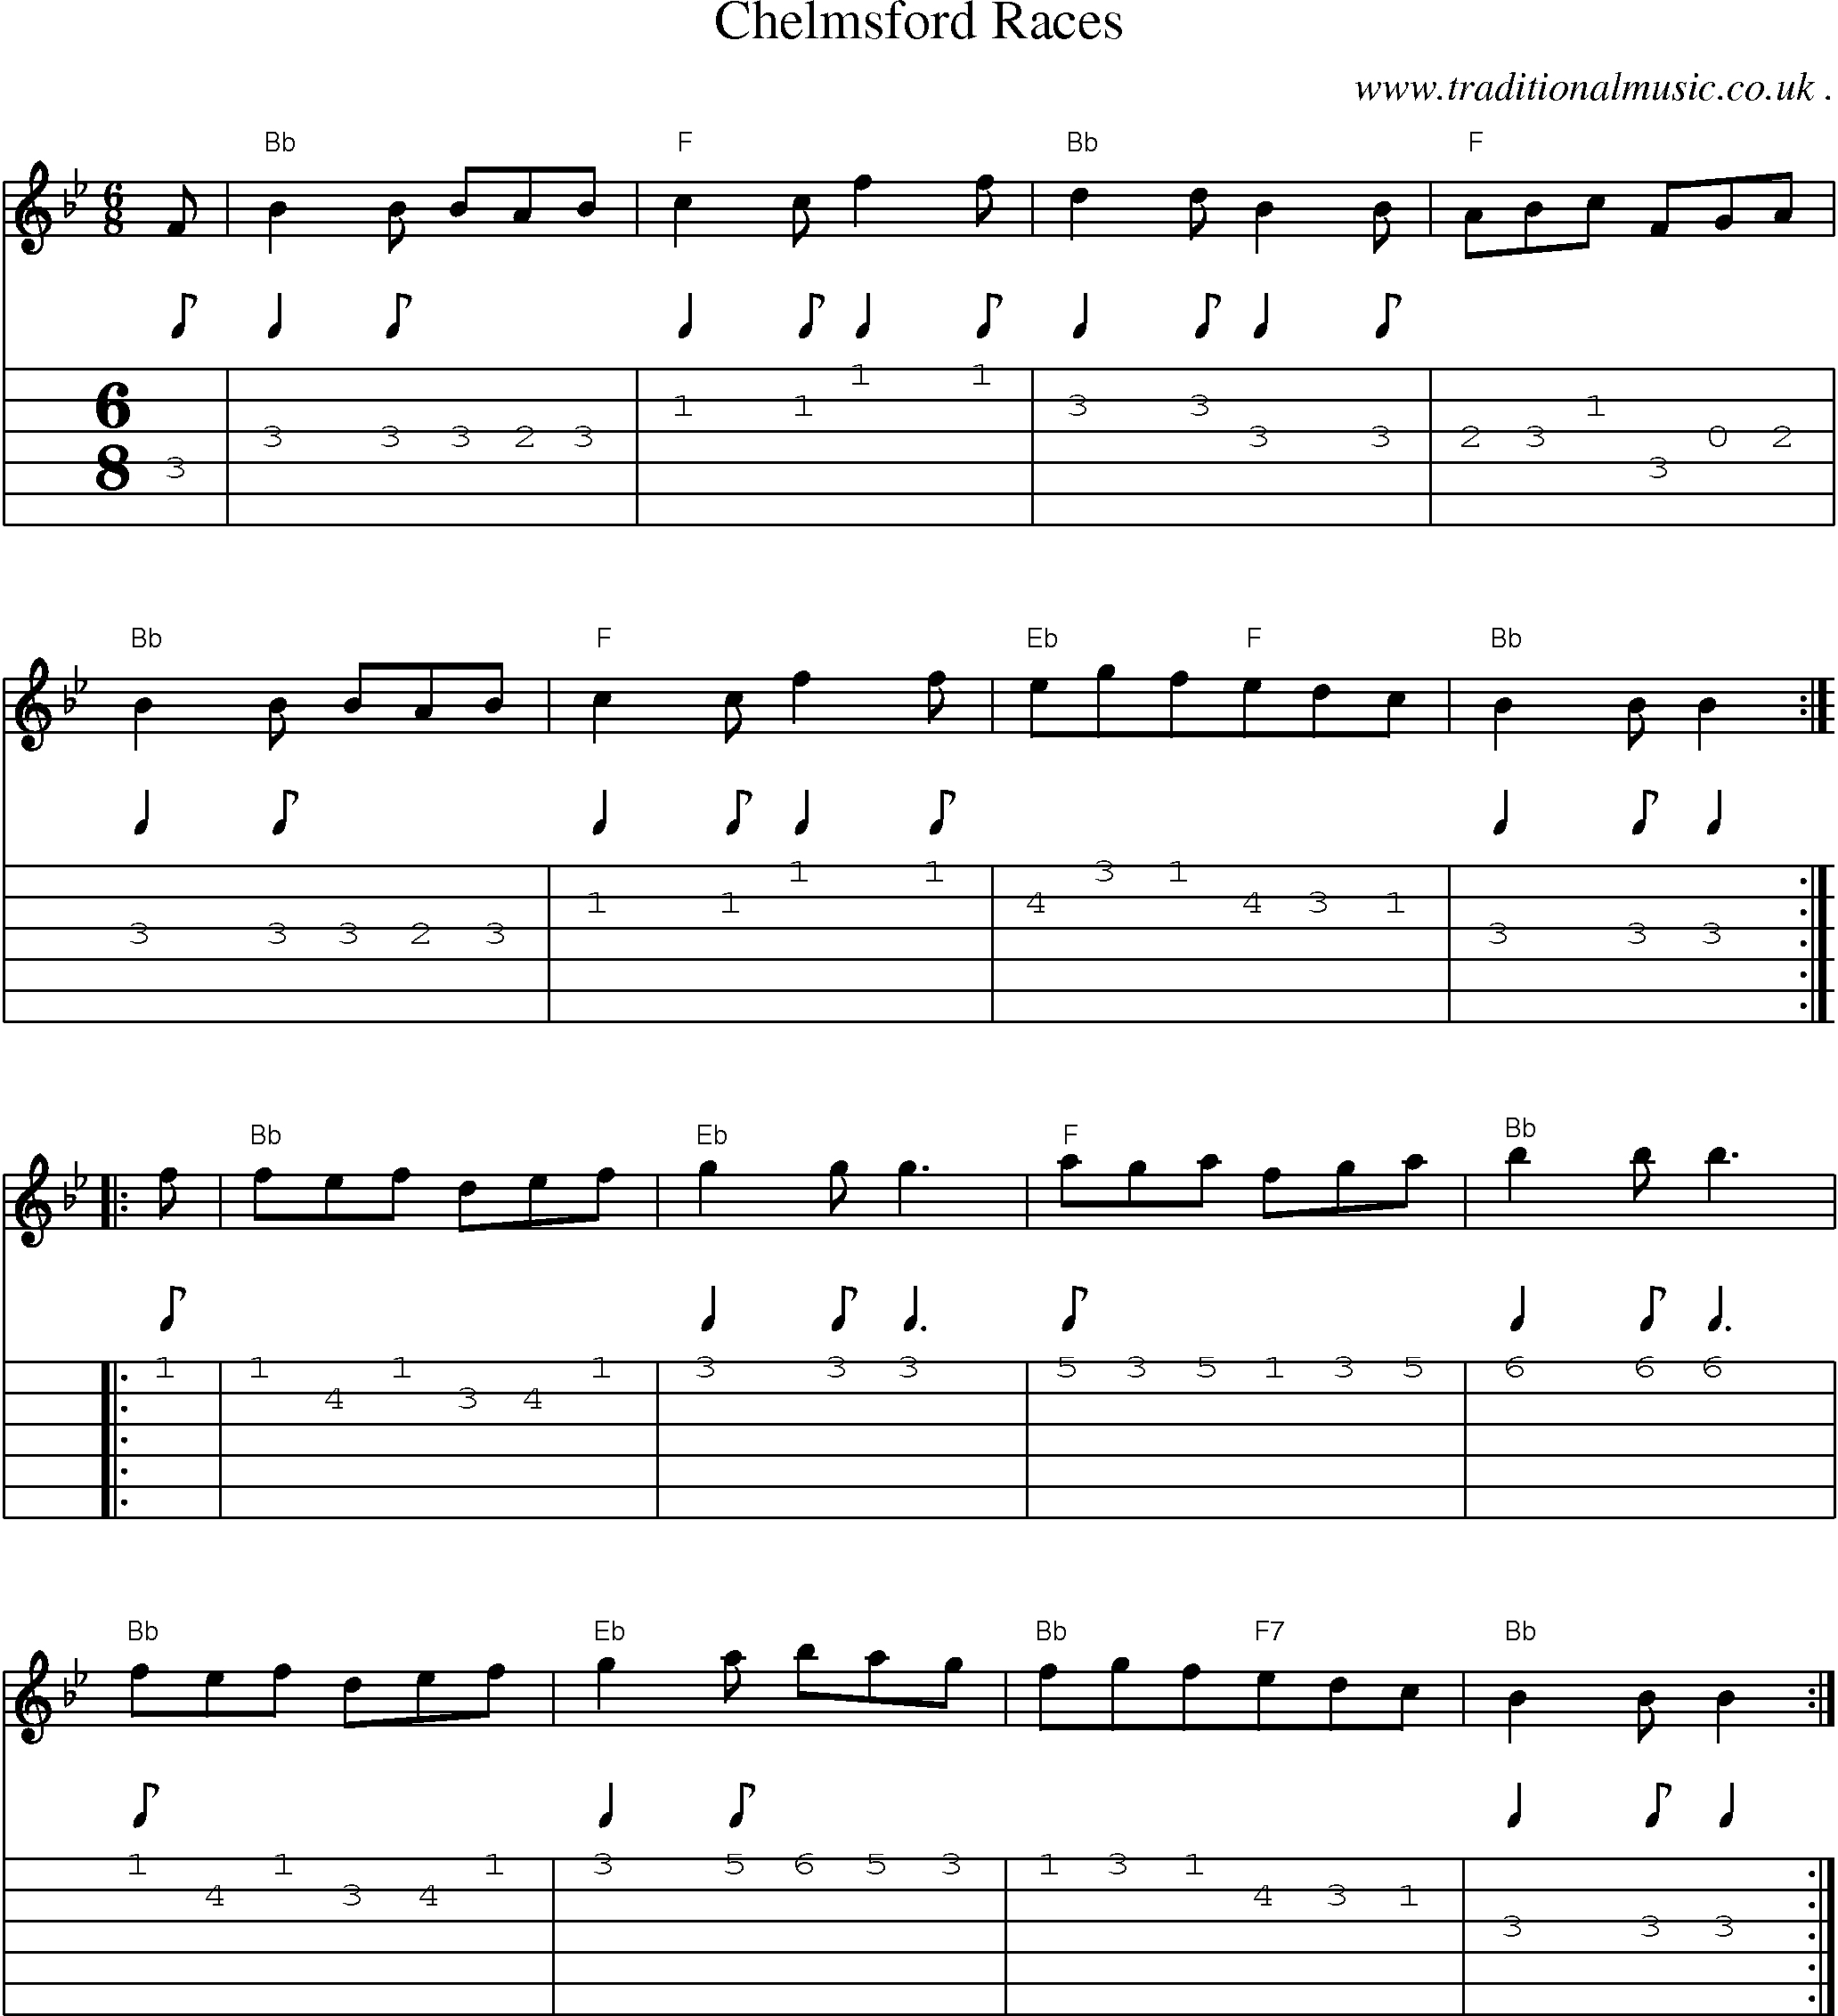 Sheet-Music and Guitar Tabs for Chelmsford Races